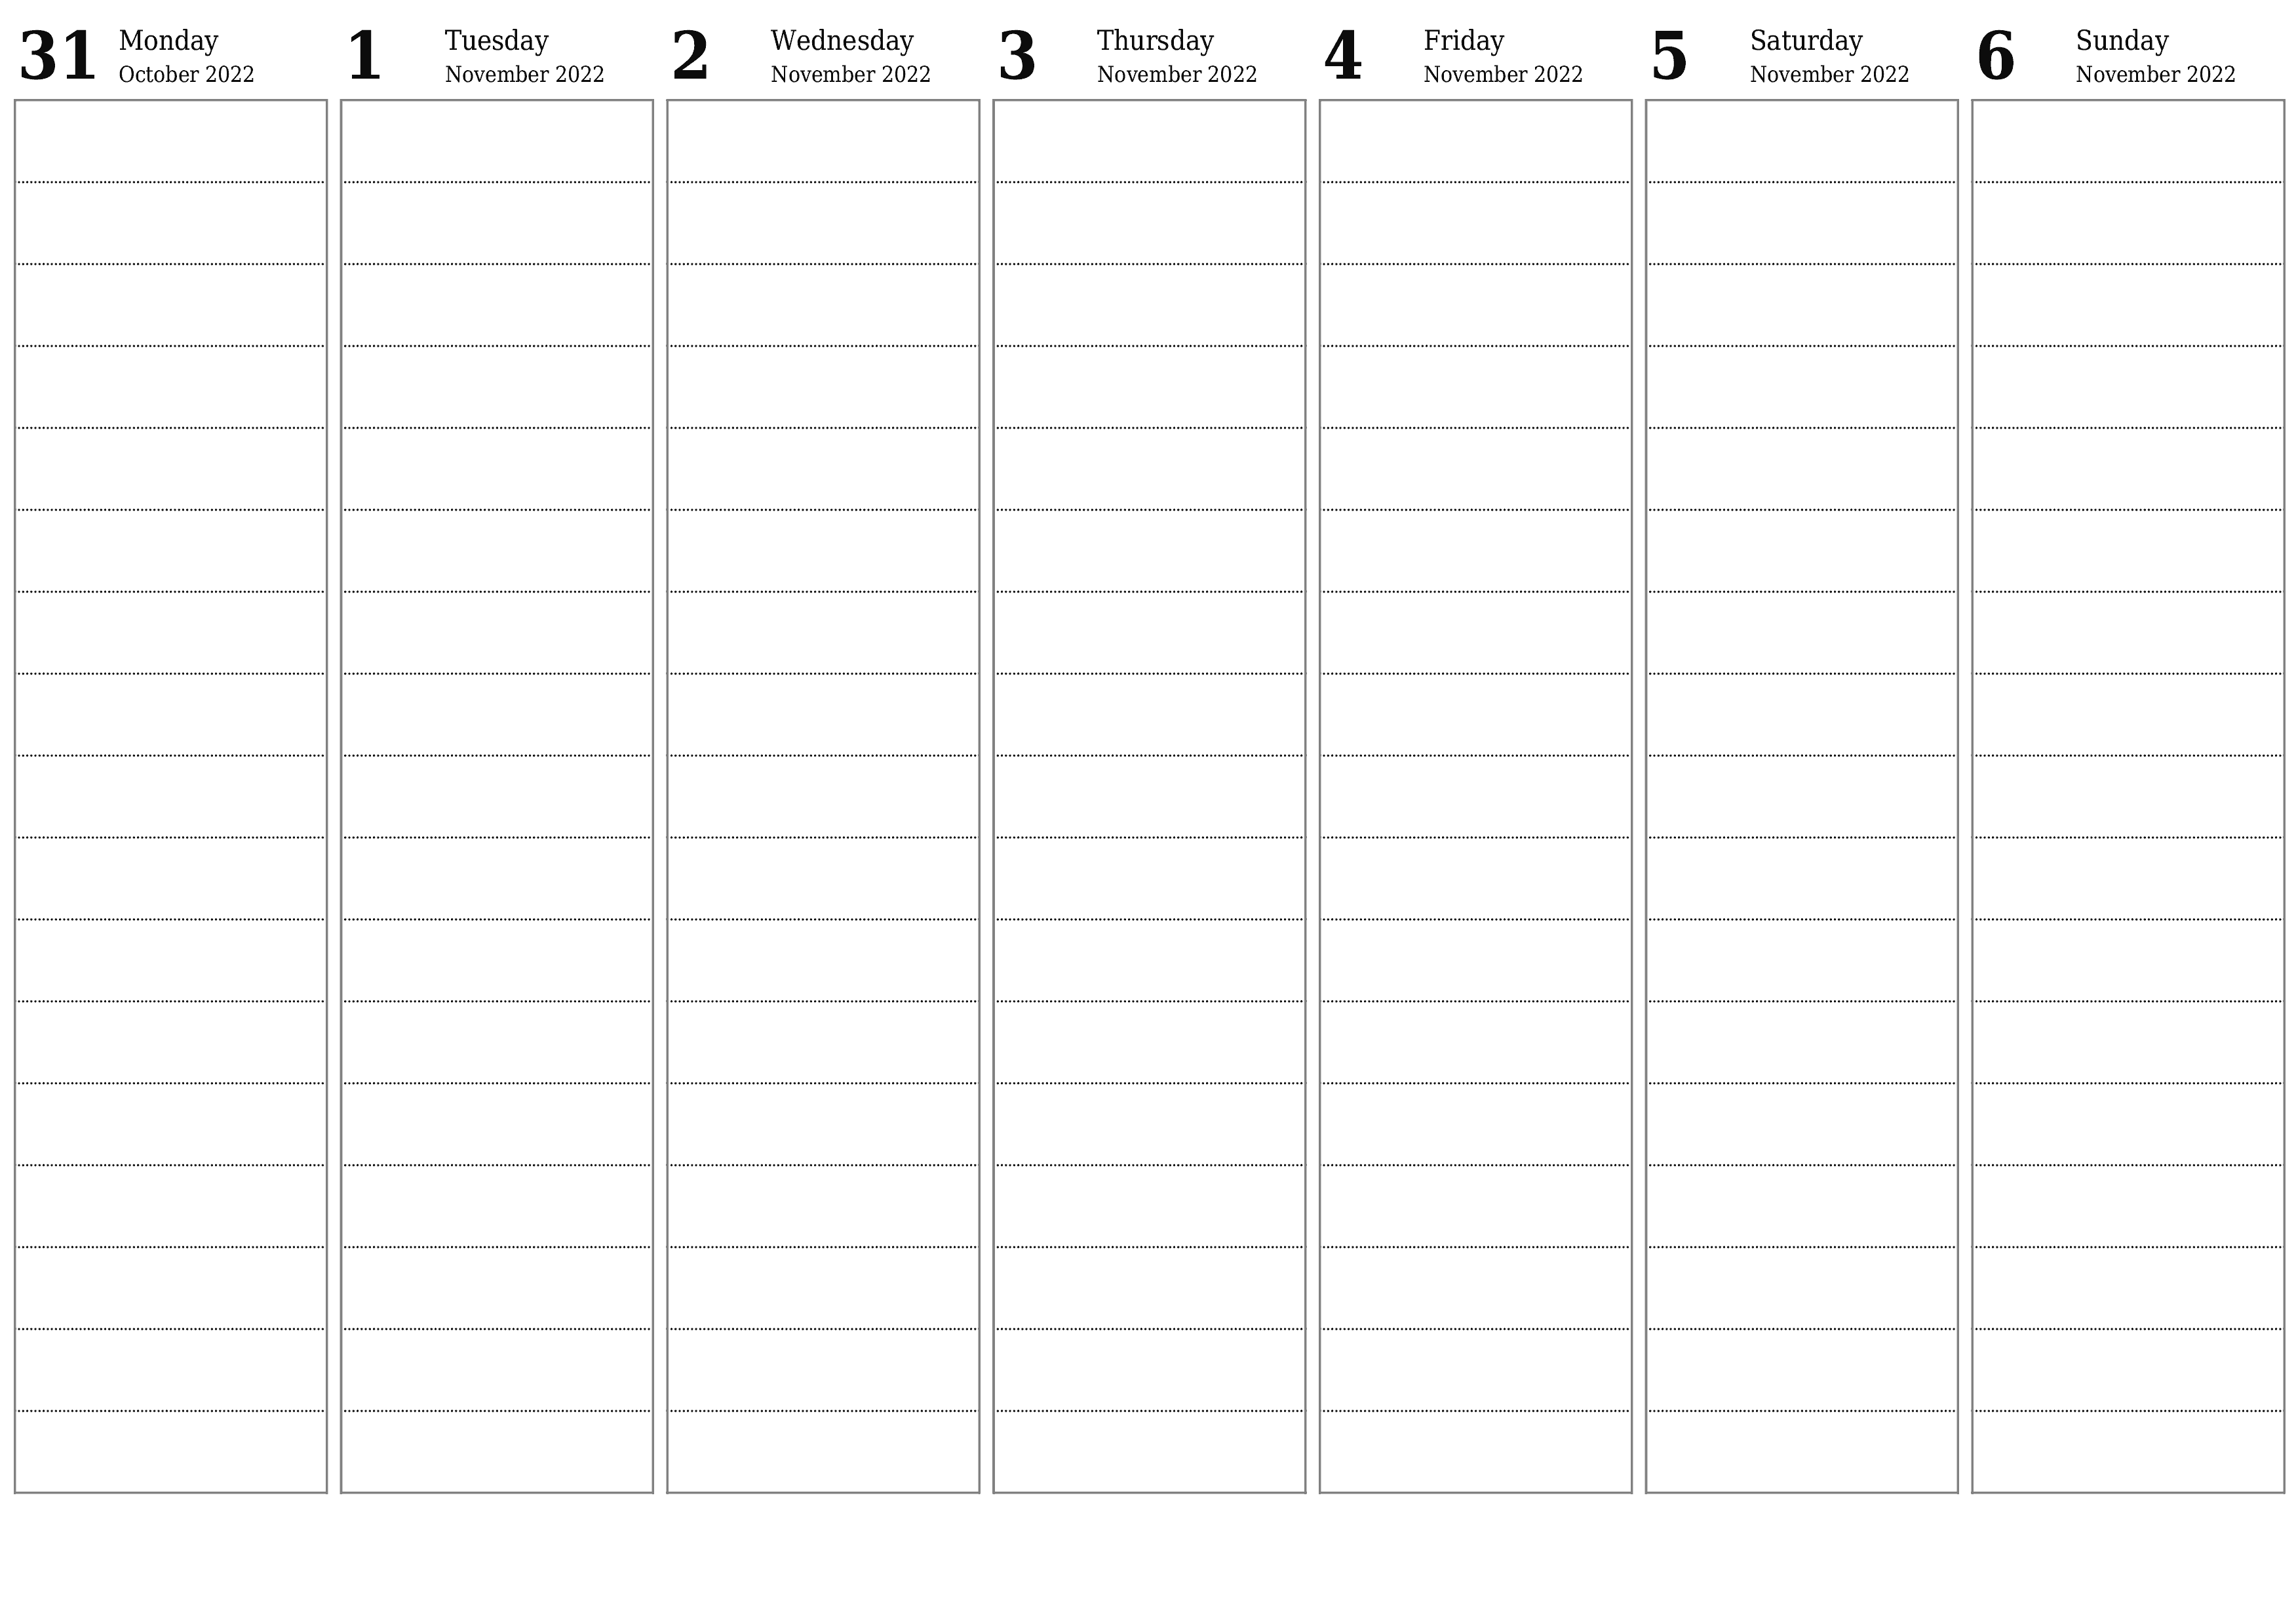 Blank weekly printable calendar and planner for week November 2022 with notes, save and print to PDF PNG English